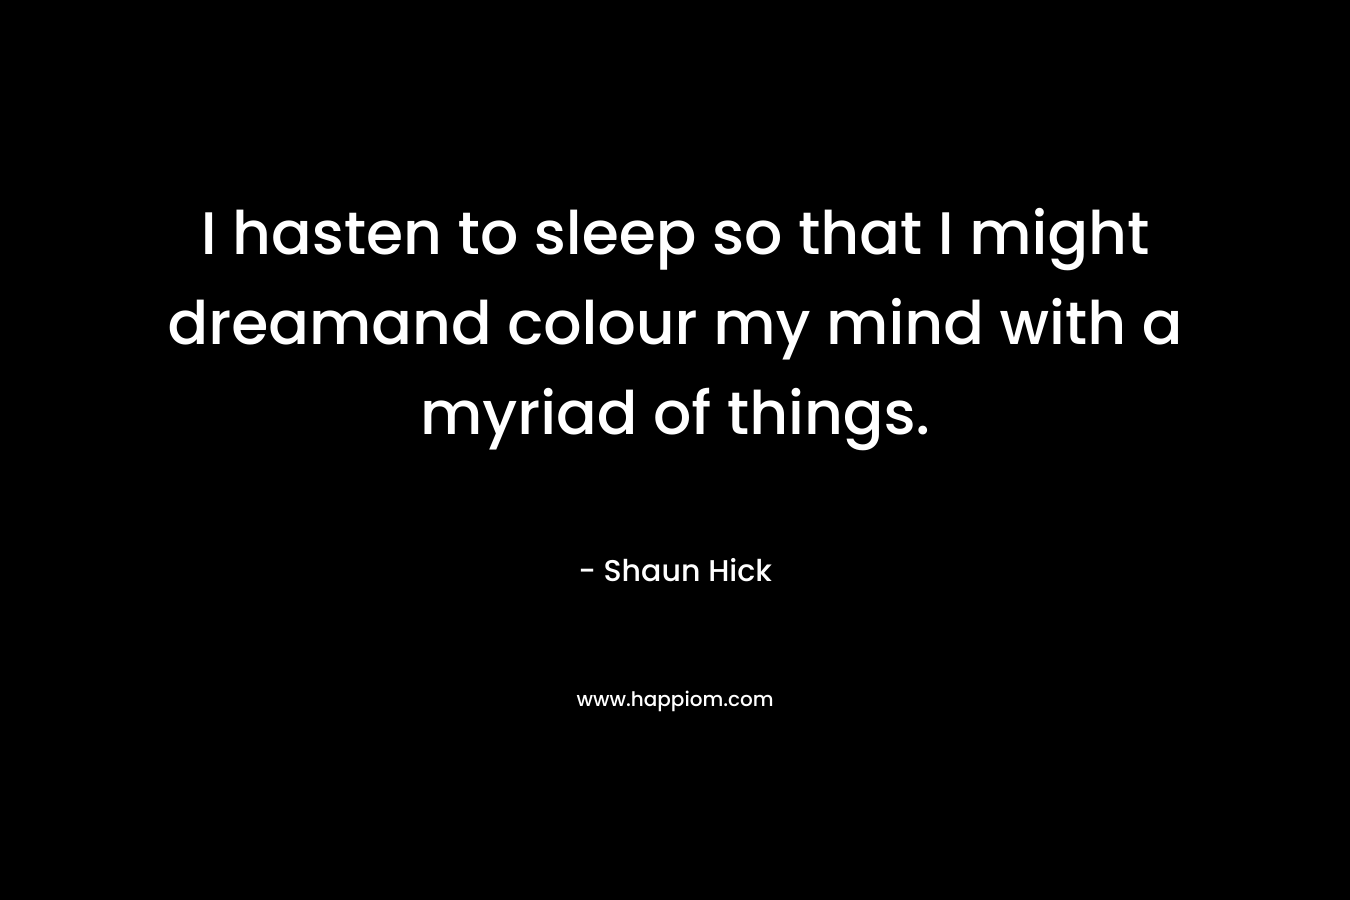 I hasten to sleep so that I might dreamand colour my mind with a myriad of things. – Shaun Hick